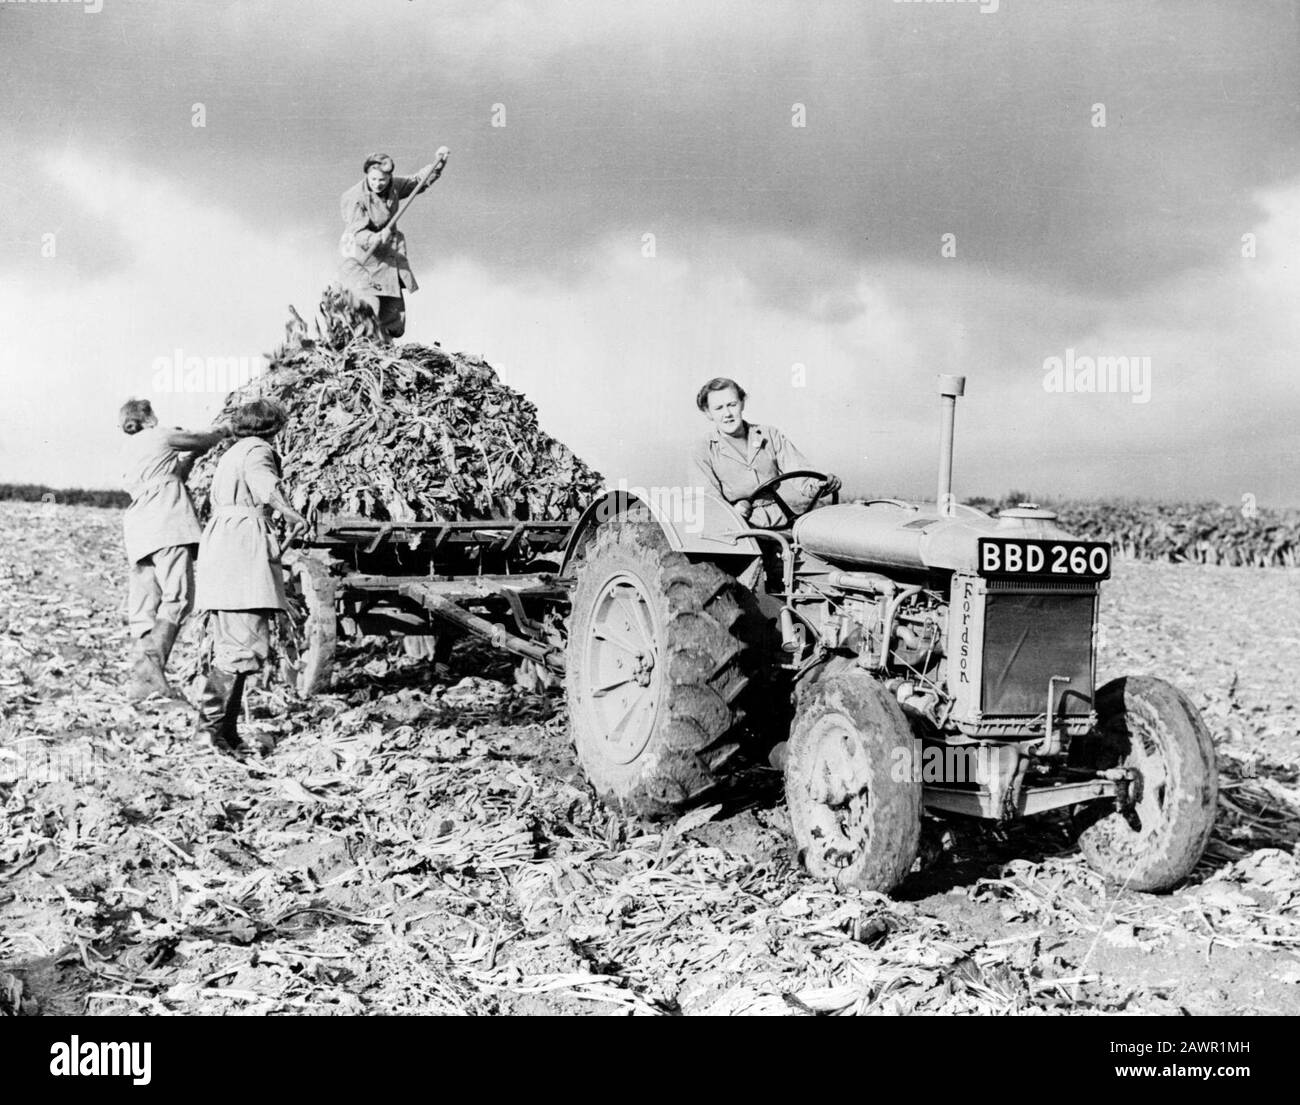 Fordson tractor with members of British Women's Land Army 1940s. Stock Photo